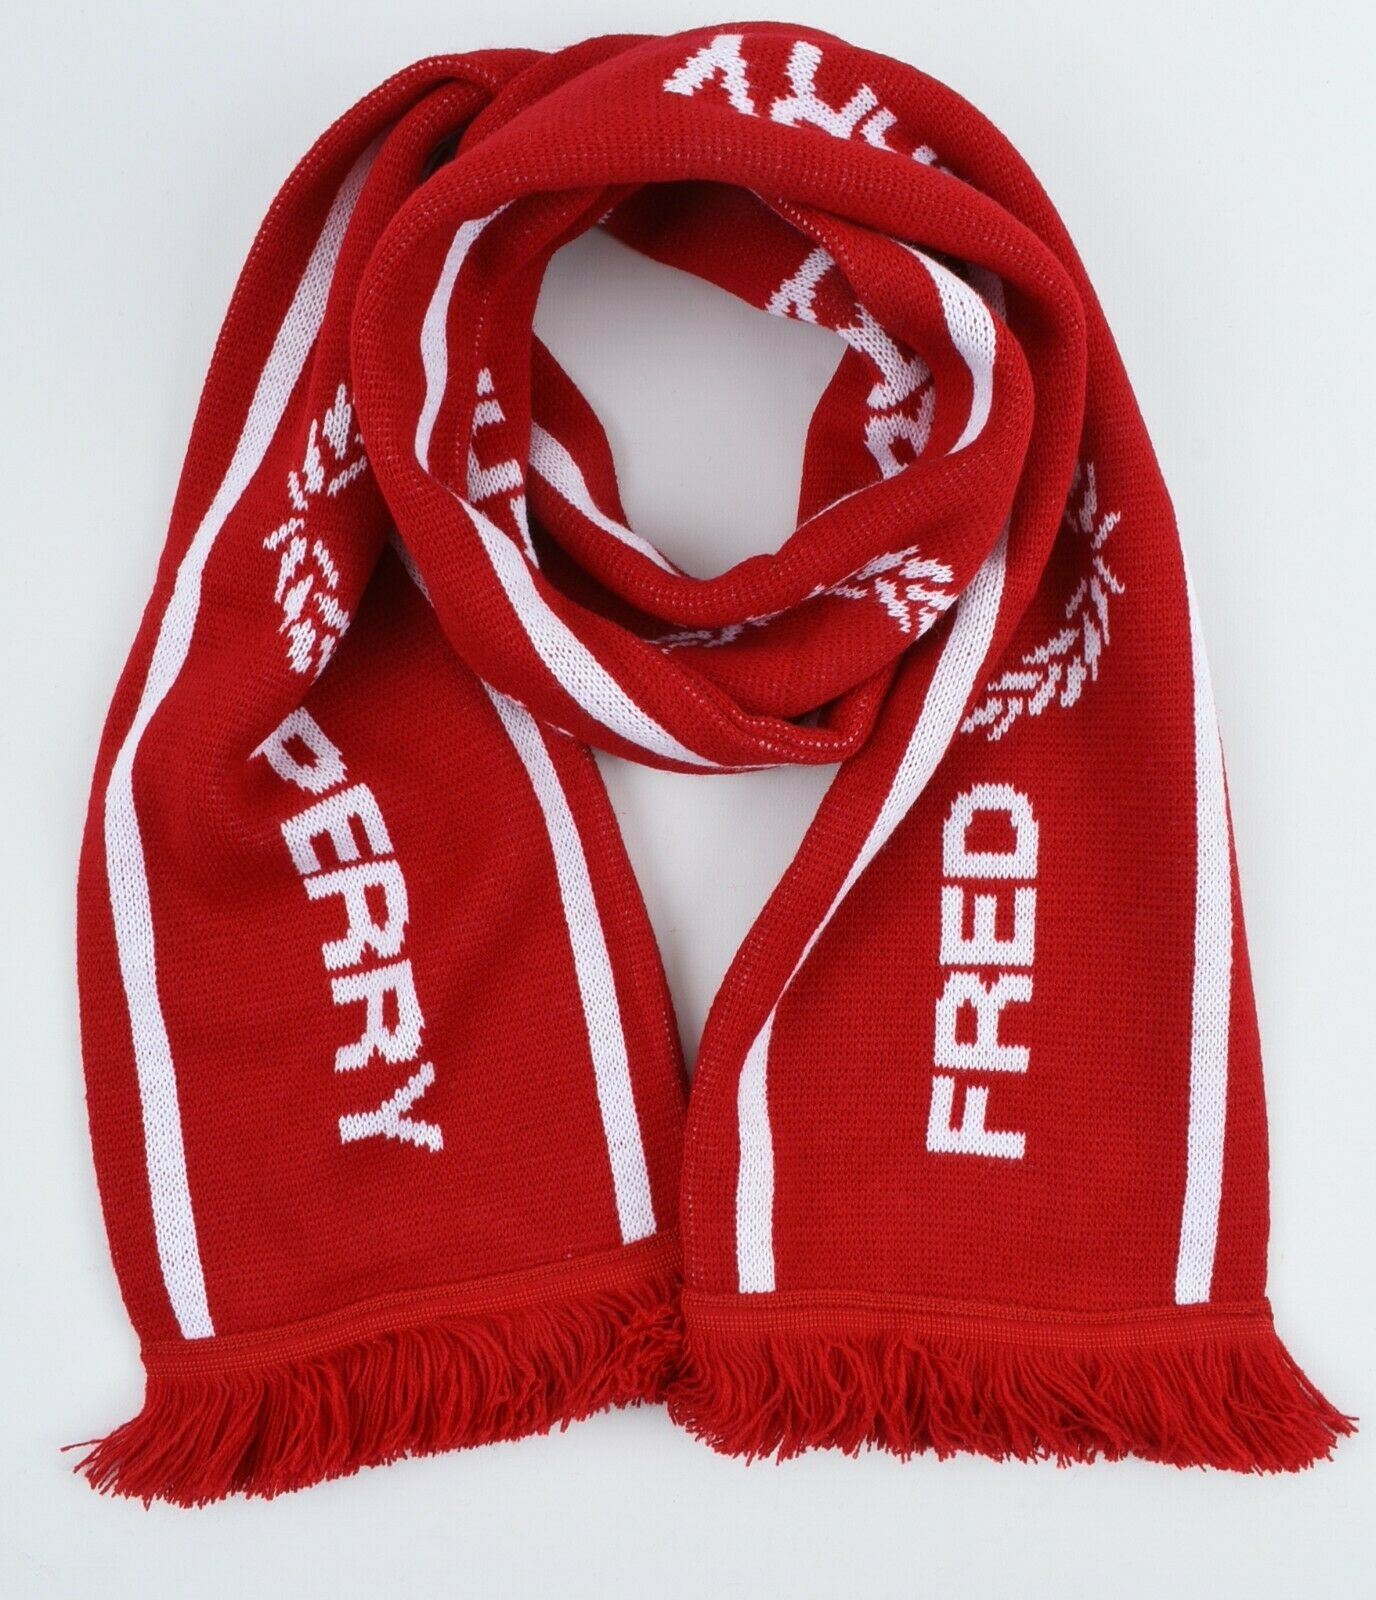 FRED PERRY Men's Crimson Red/White Knitted Scarf, made in England